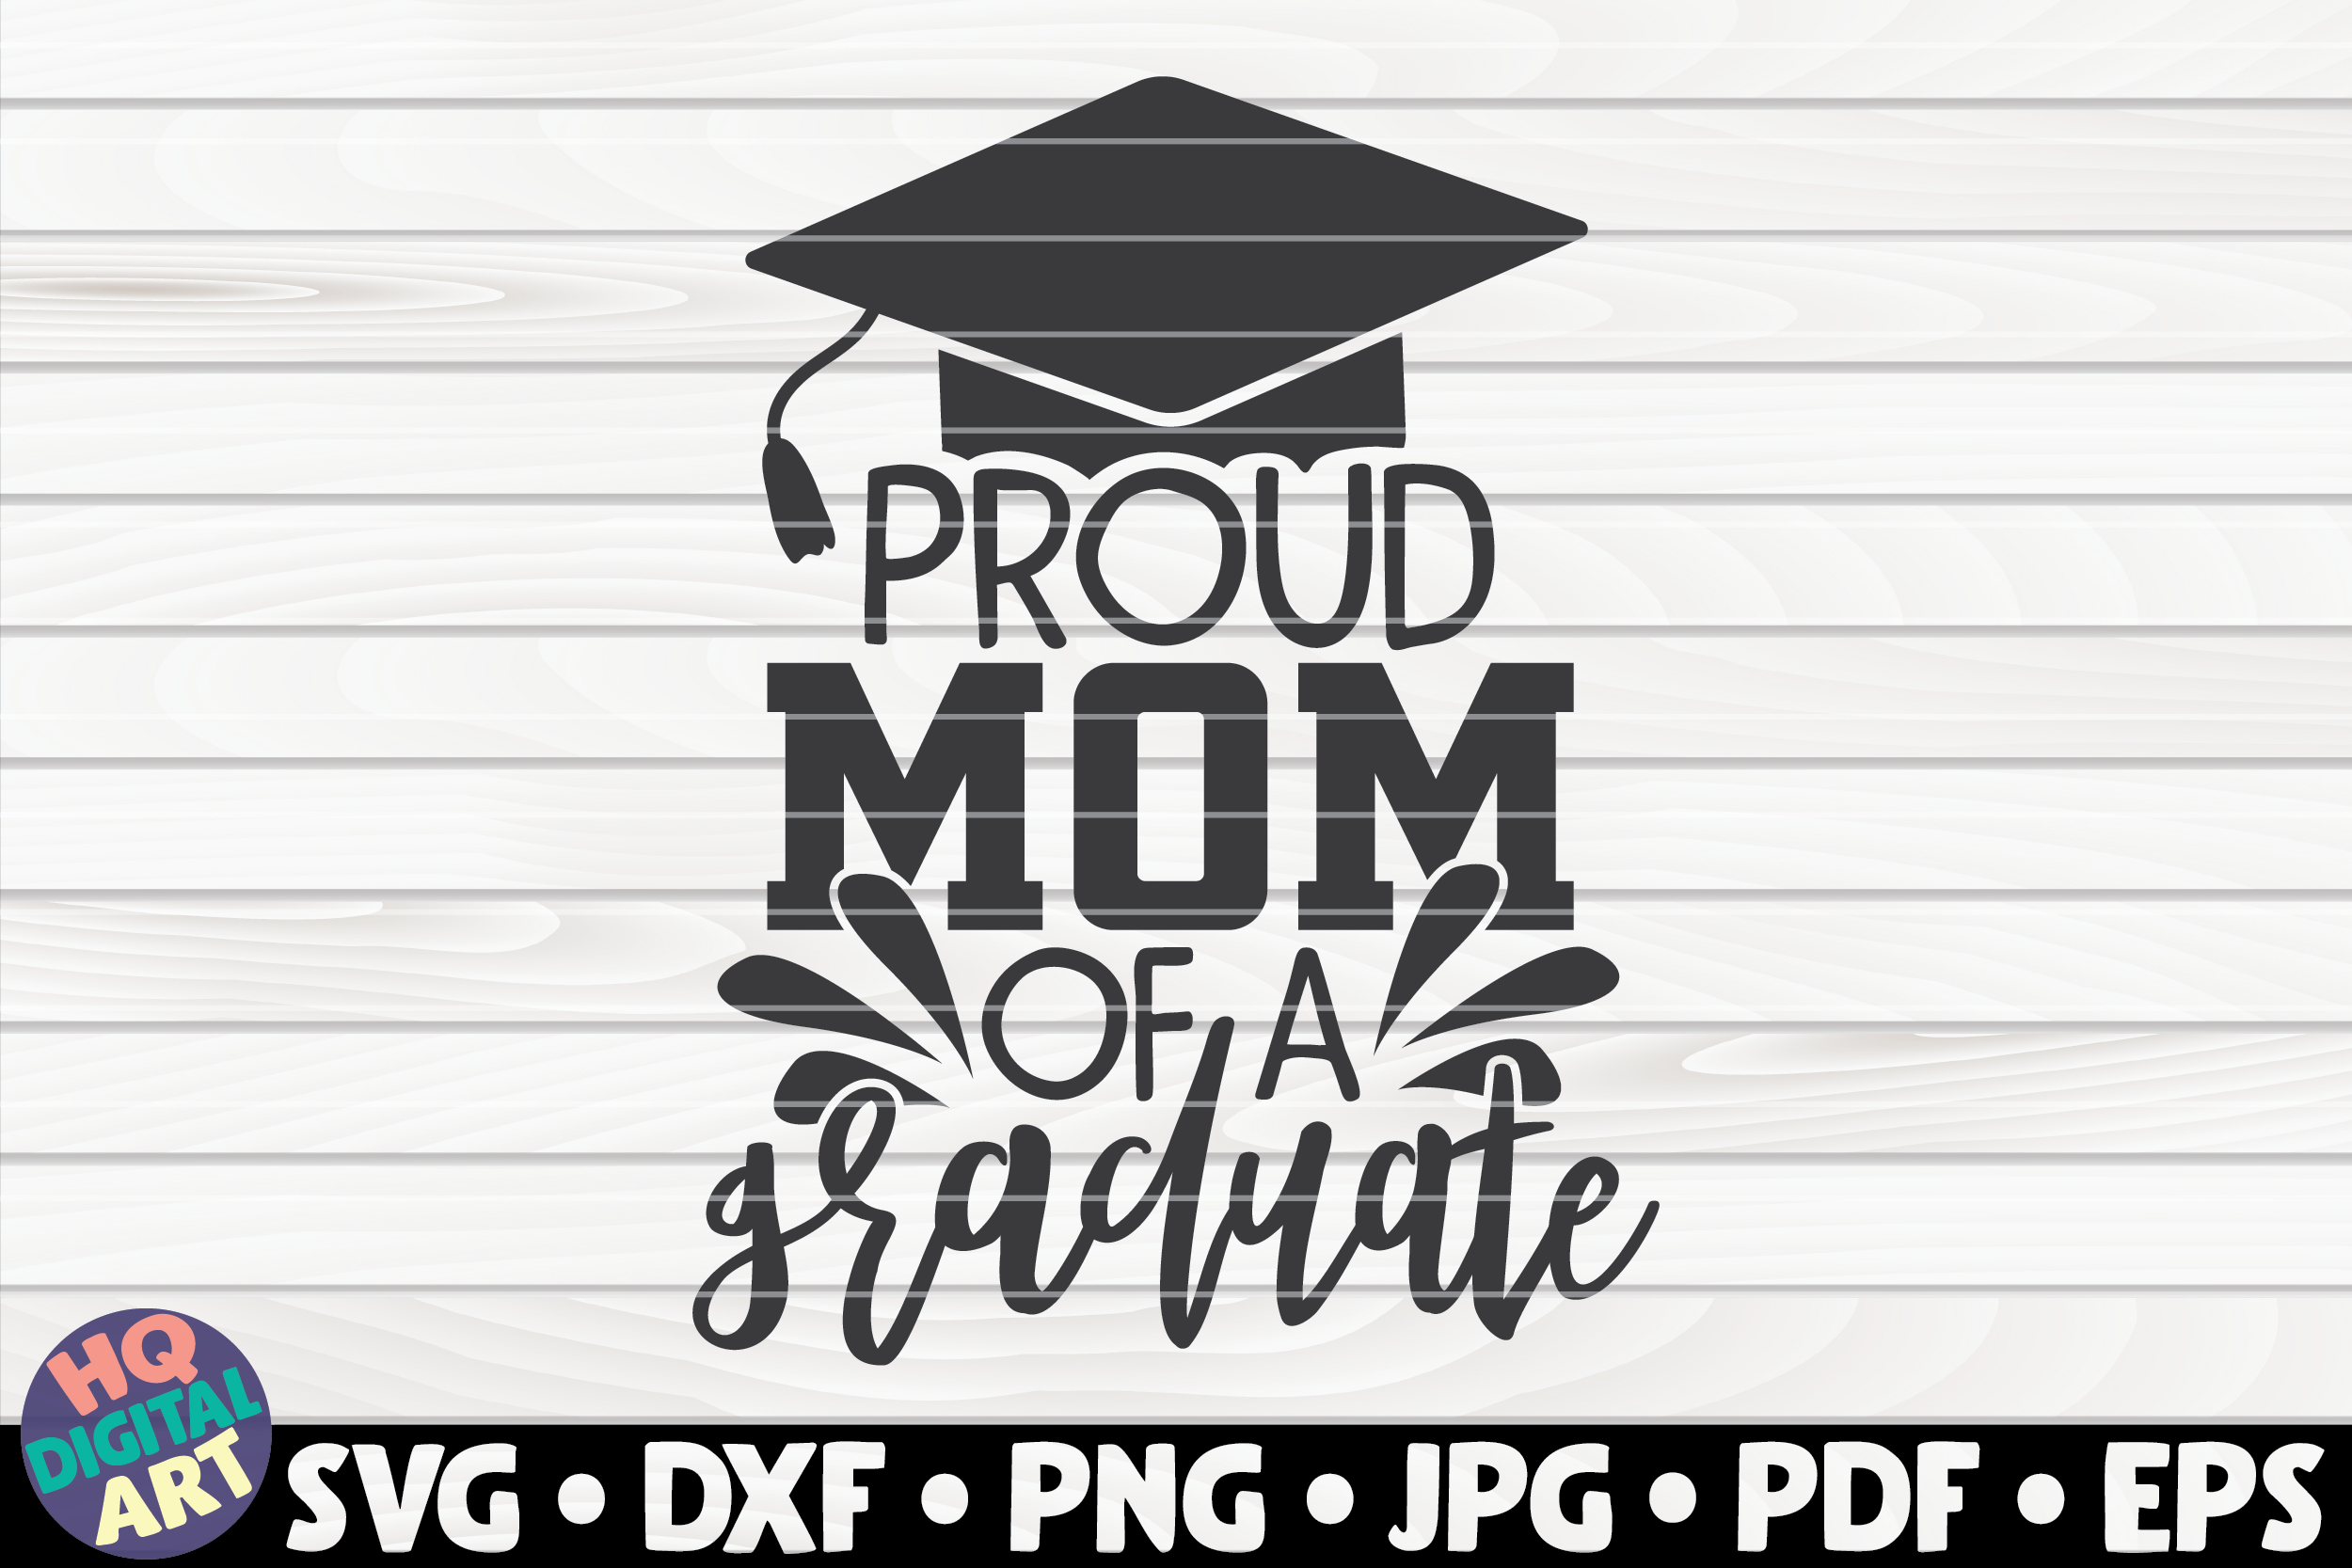 Download Proud Mom Of A Graduate Svg Graduation Quote By Hqdigitalart Thehungryjpeg Com